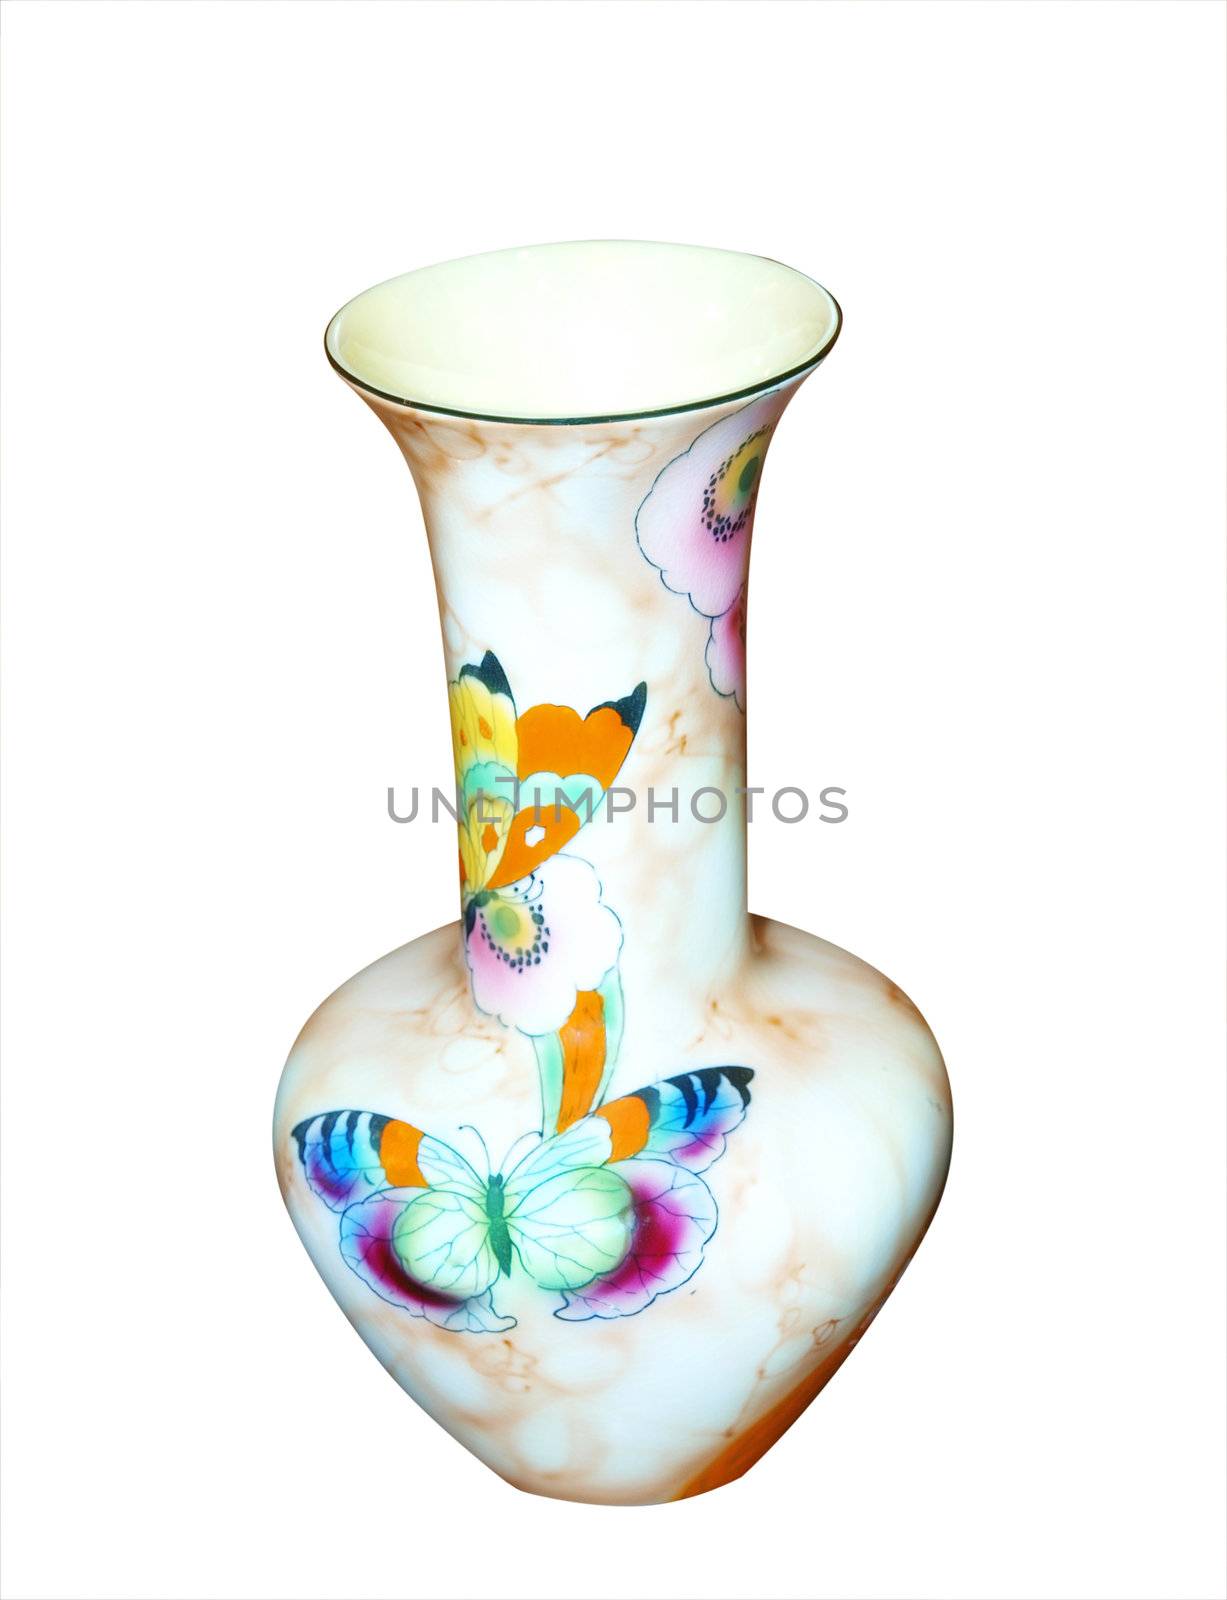 Antique Vase isolated with clipping path           